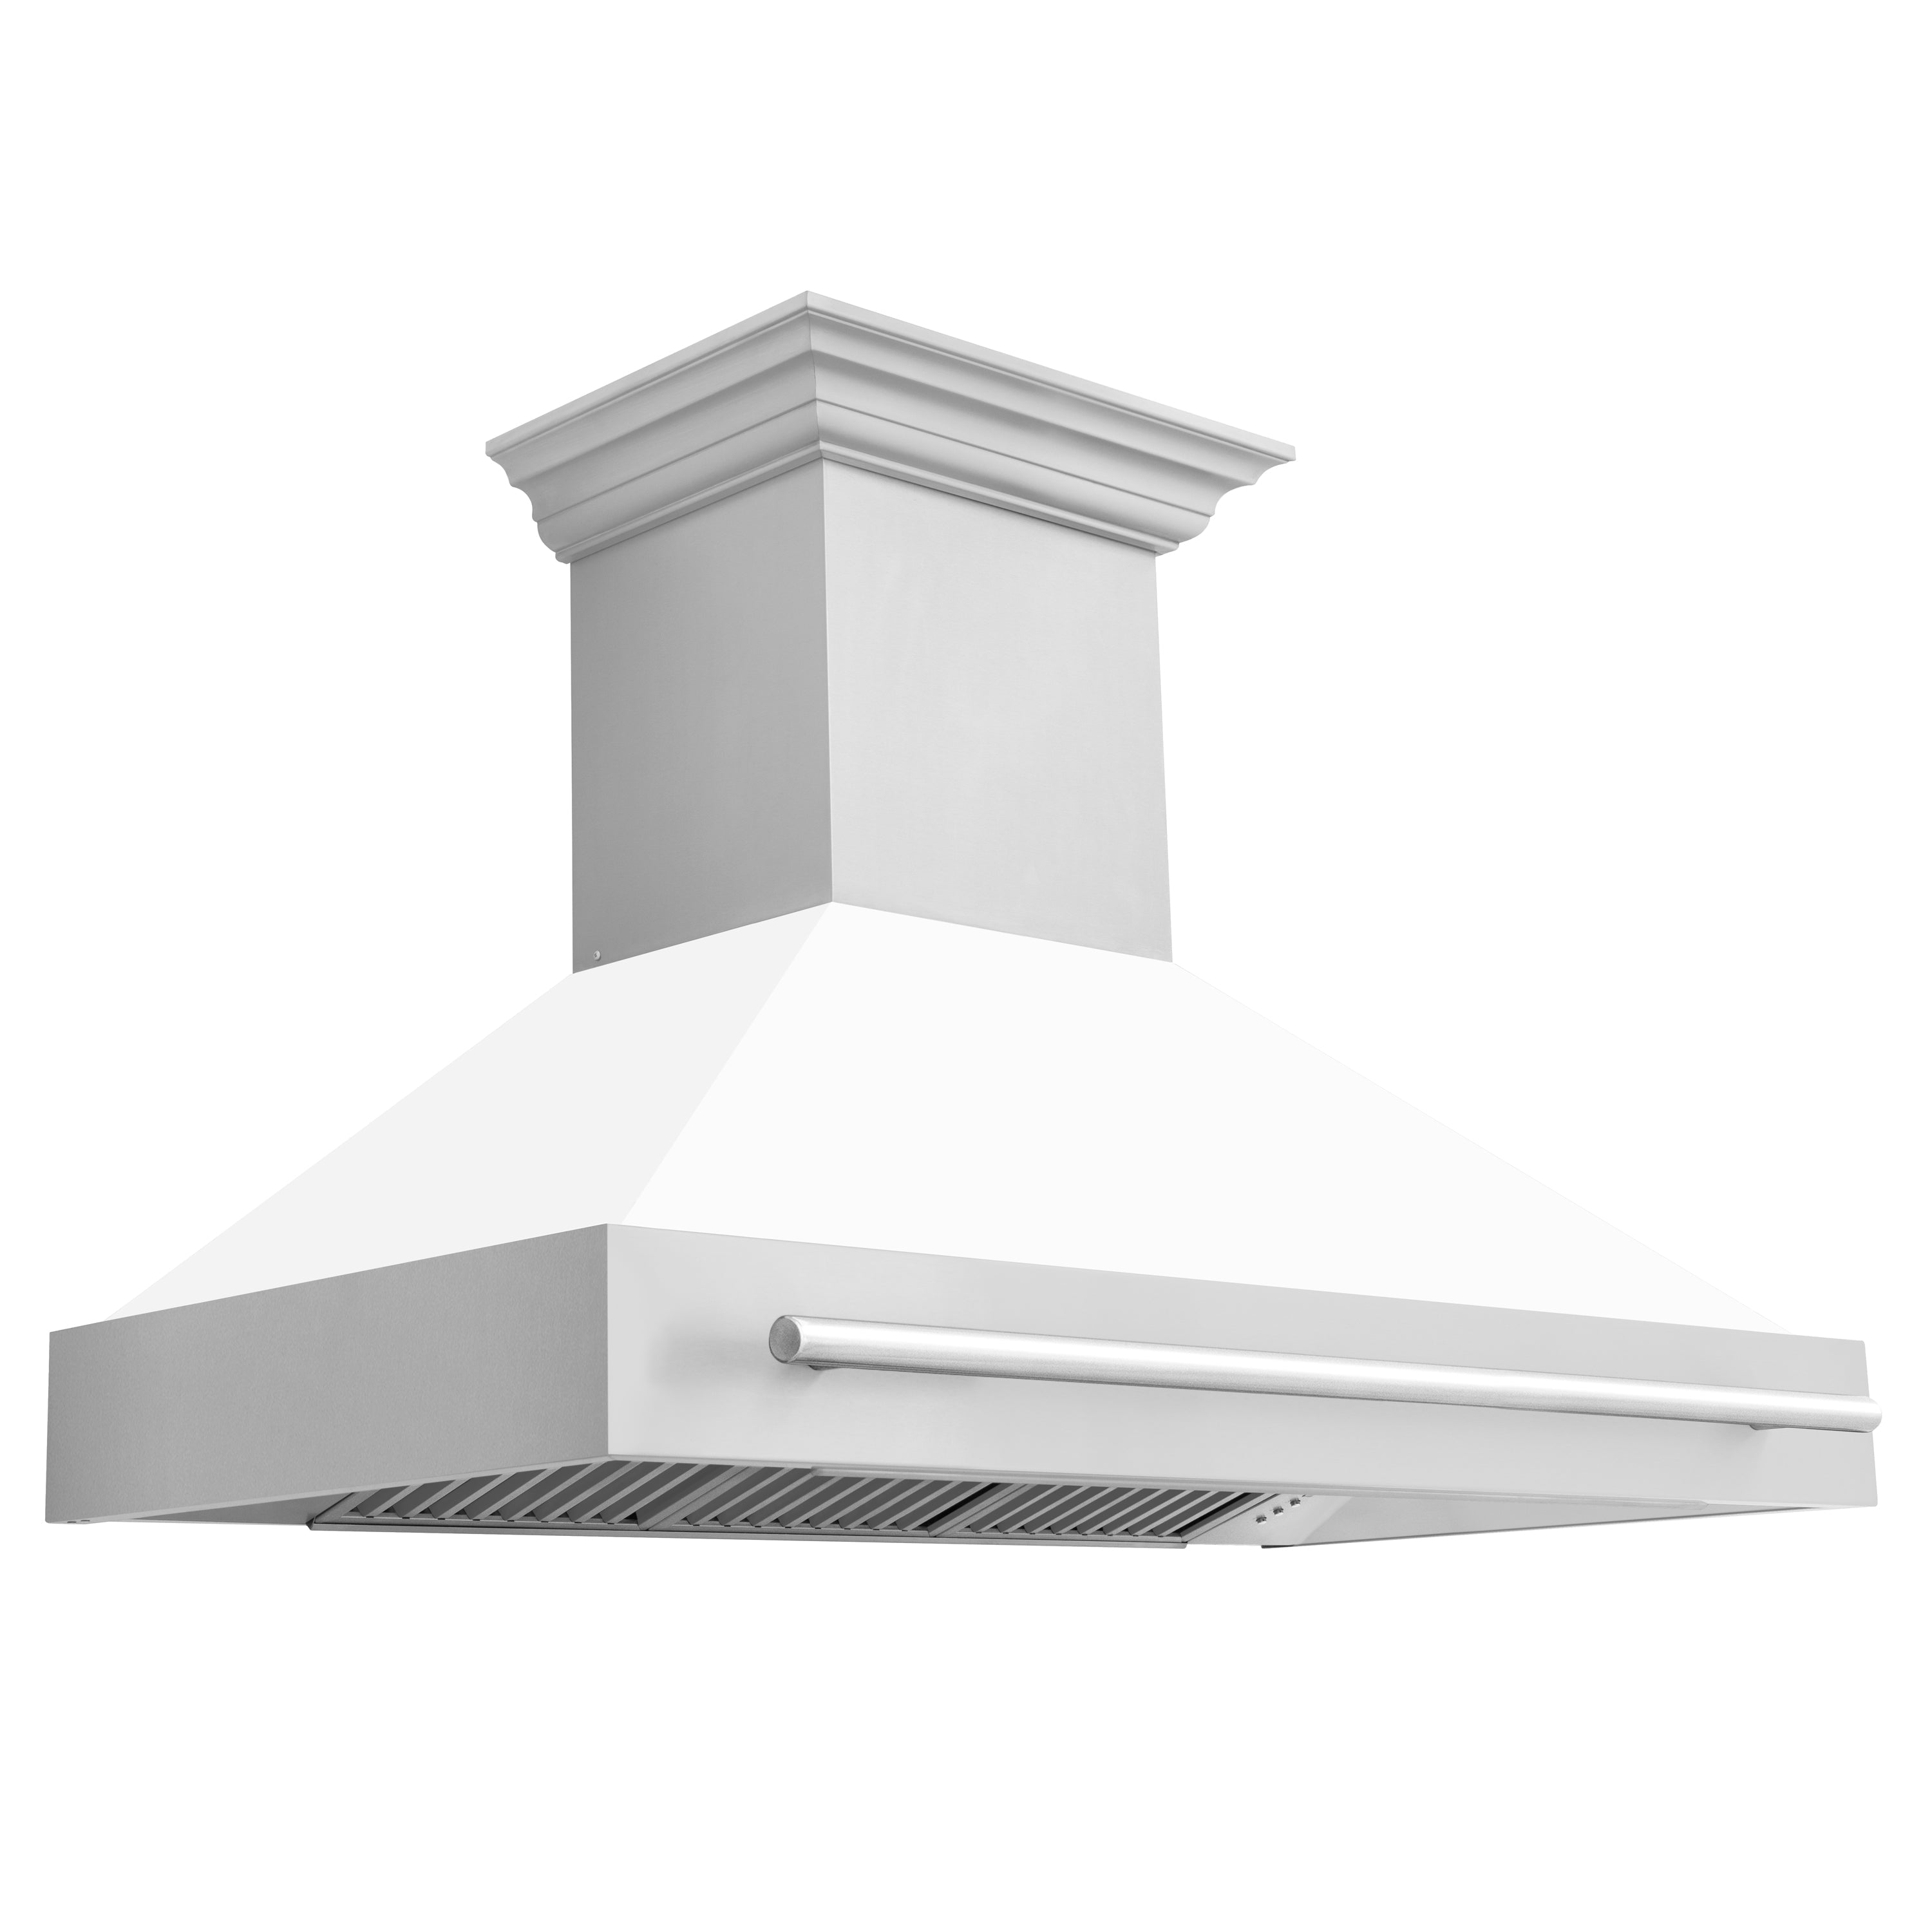 ZLINE 48 in. Stainless Steel Range Hood with Stainless Steel Handle (8654STX-48) with White Matte shell.